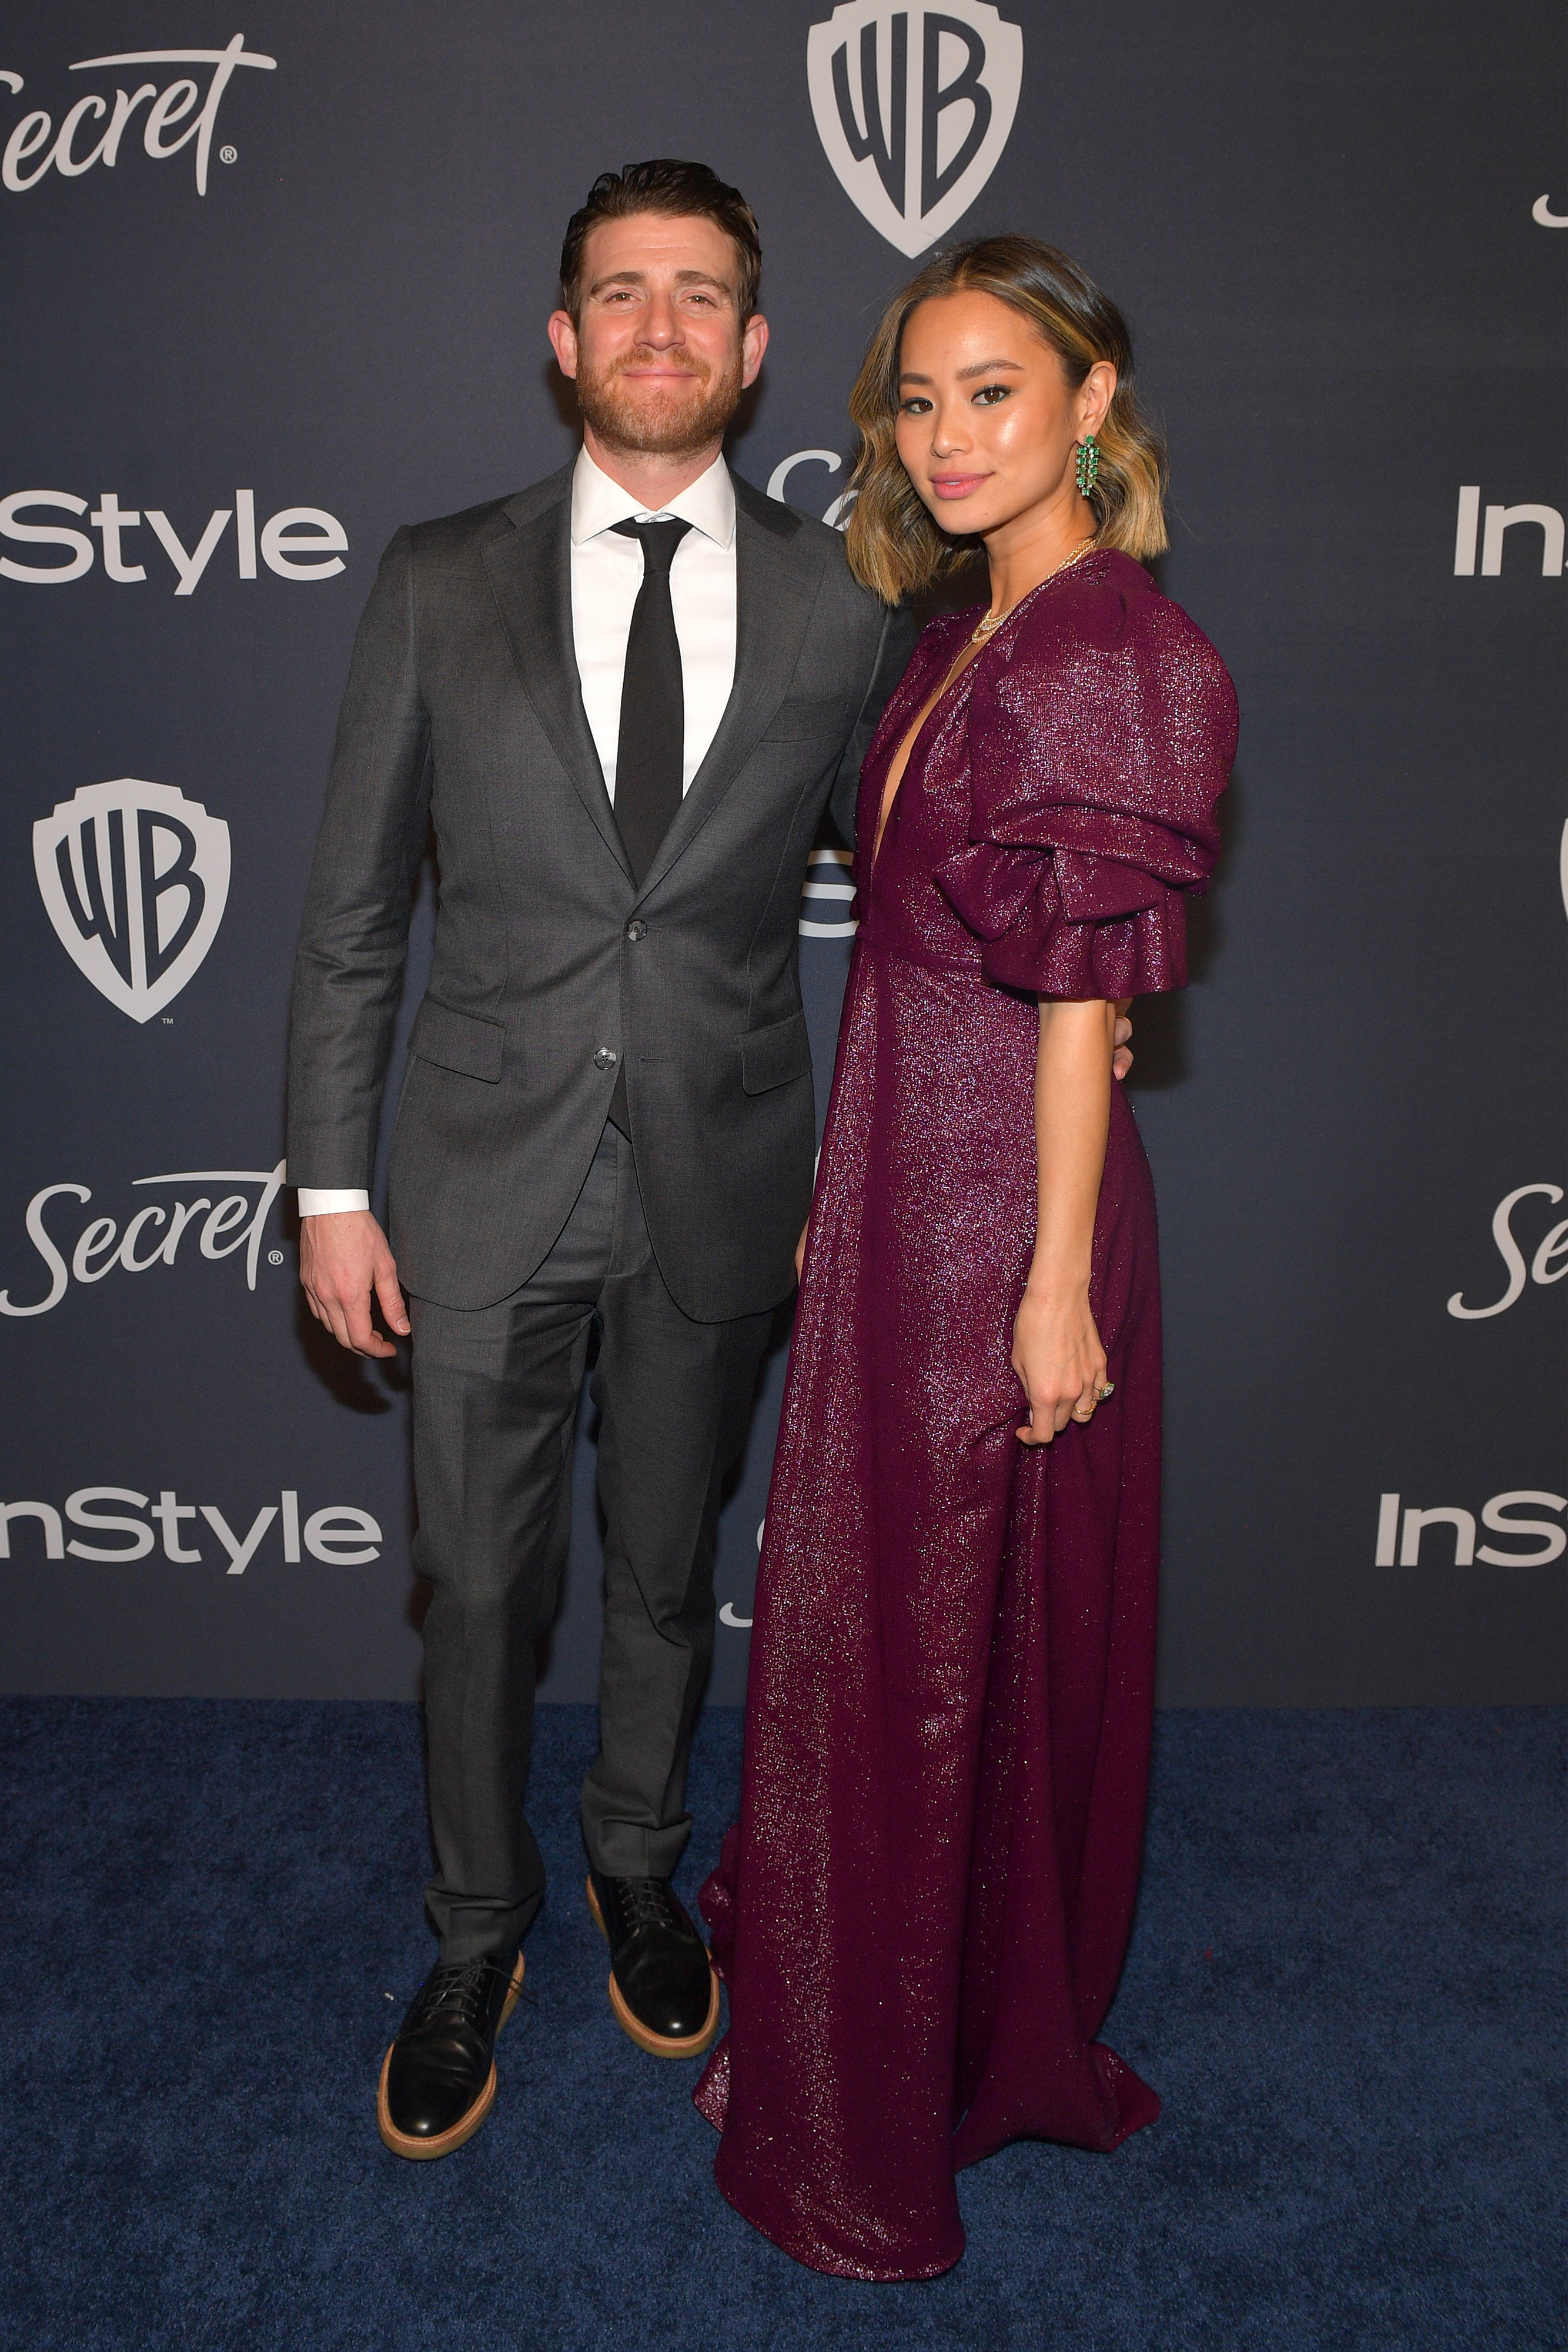 Bryan Greenberg and Jamie Chung arrive at The InStyle And Warner Bros. Golden Globe Awards after party on January 5, 2020